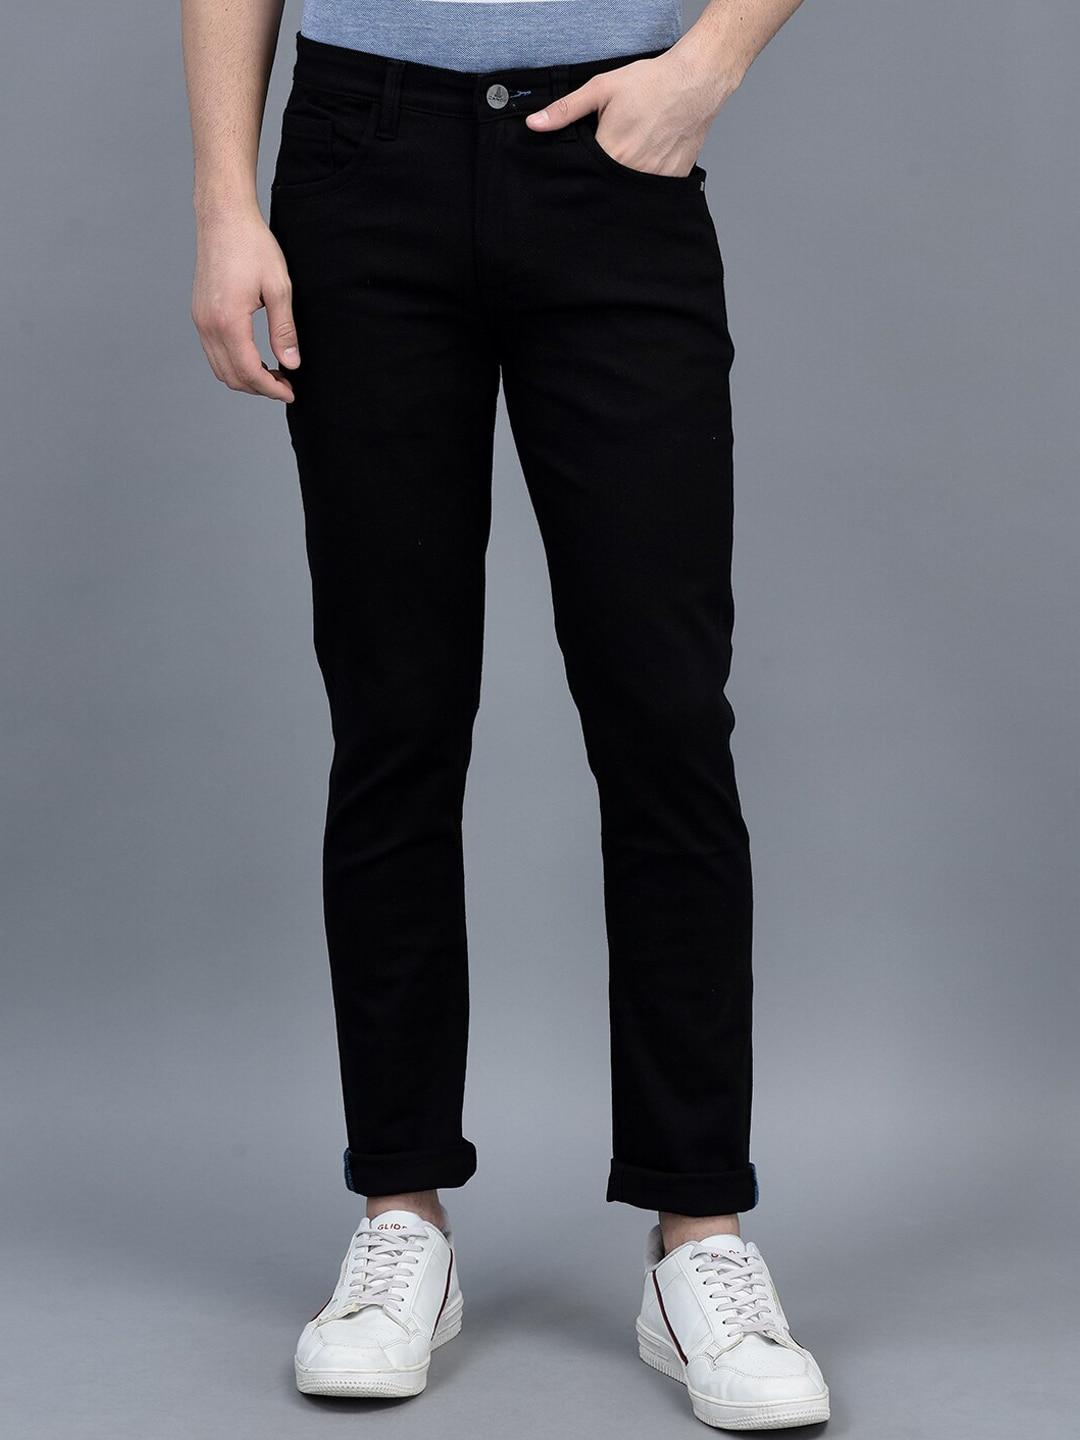 canoe-men-smart-clean-look-mid-rise-stretchable-jeans